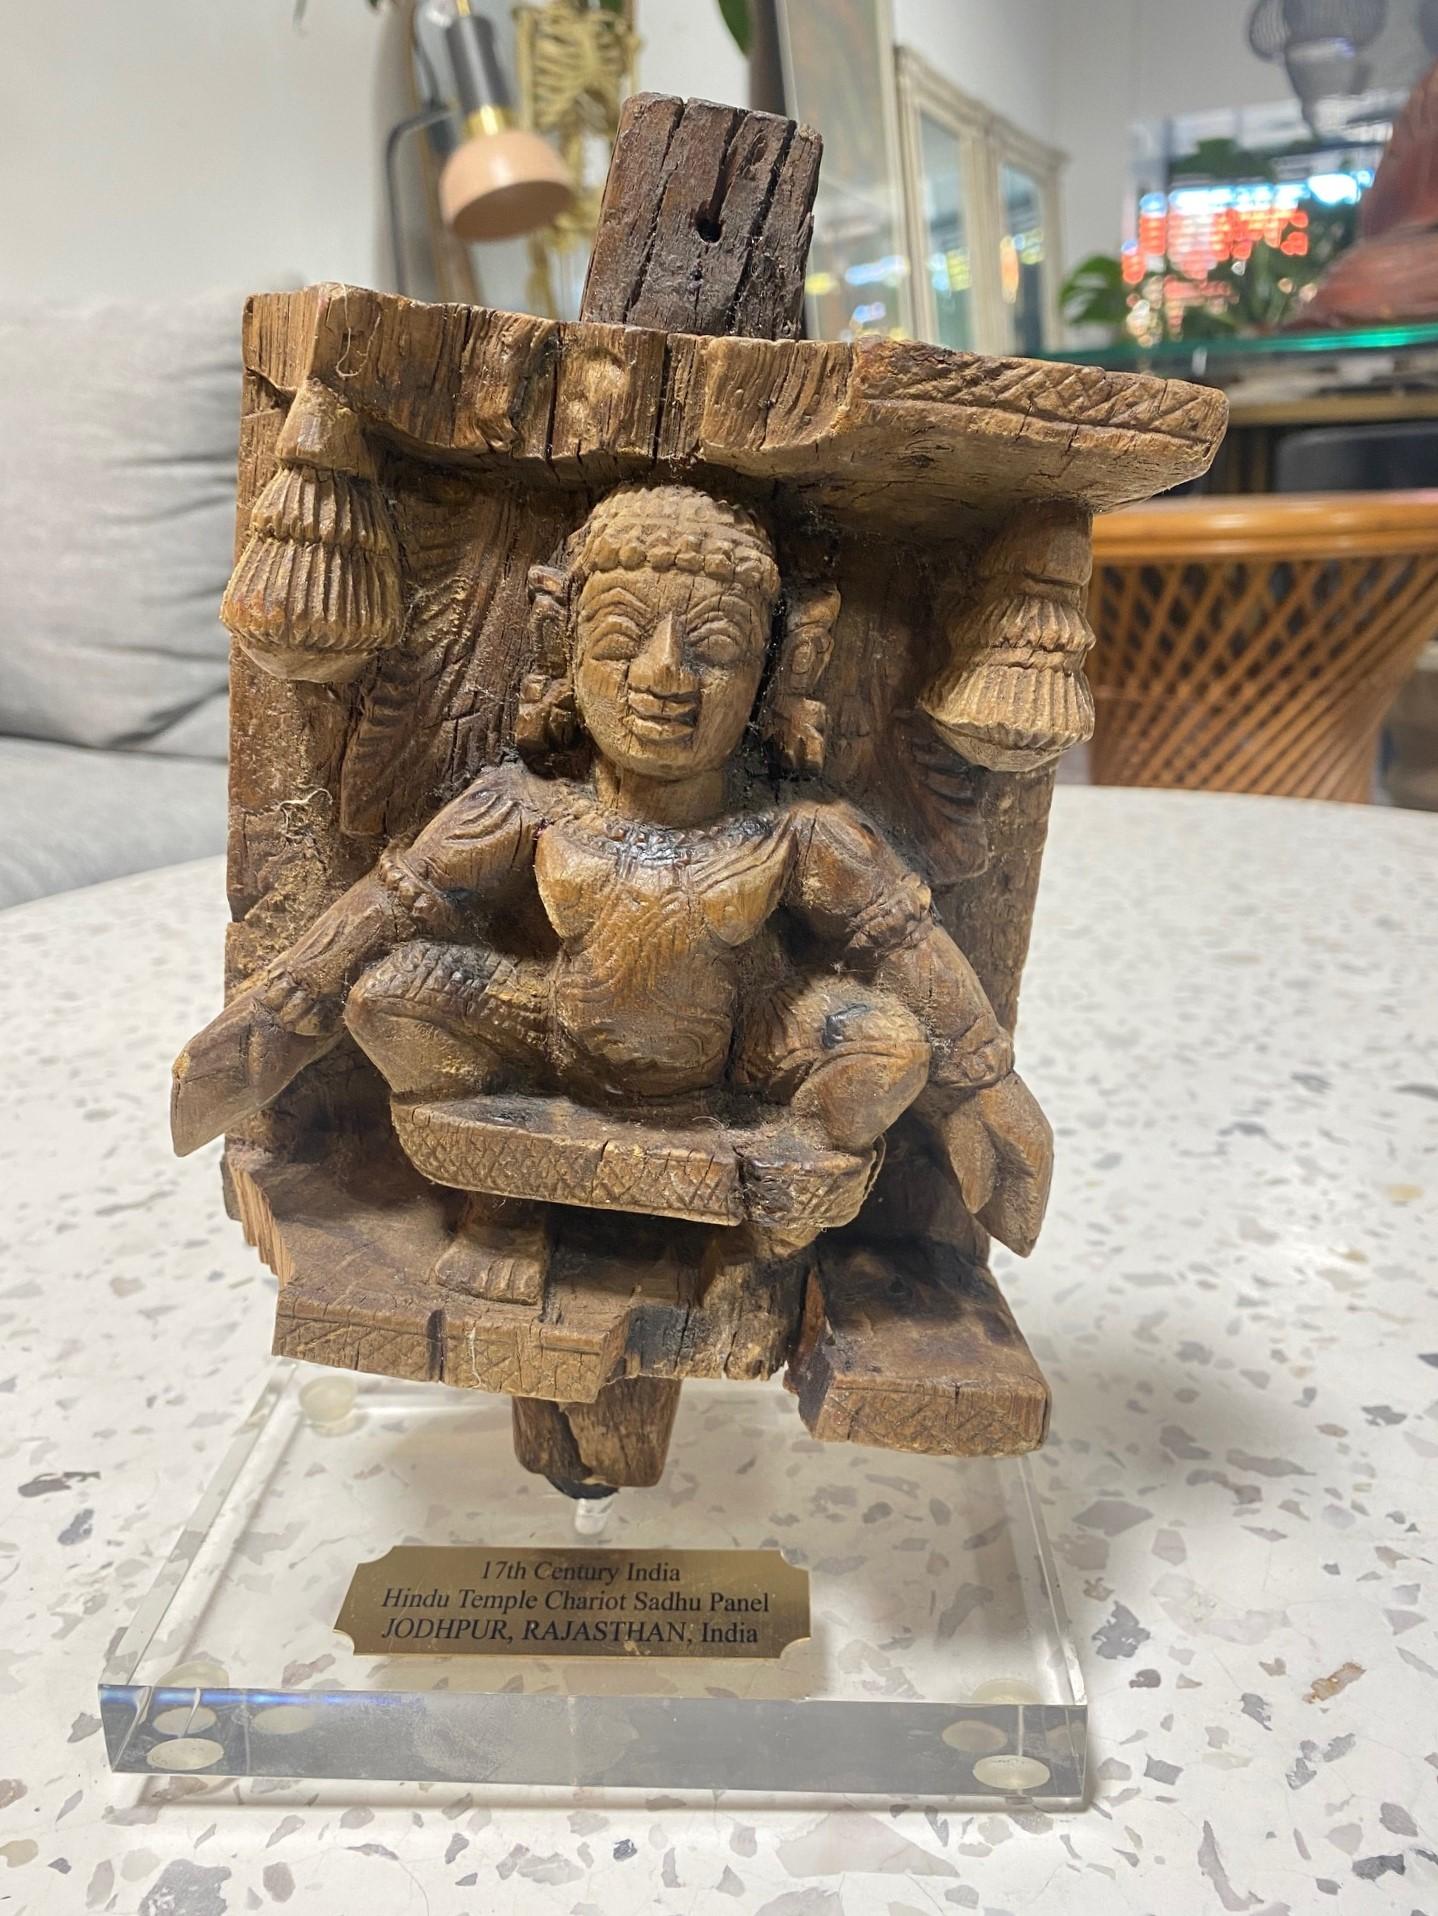 A wonderful Indian (South India) wood-carved Hindu temple chariot Sadhu panel deity sculpture from Jodhpur, Rajasthan, circa the 17th century (as marked on base).  

This piece is hand-carved from a single piece of wood and has a dark, rich patina